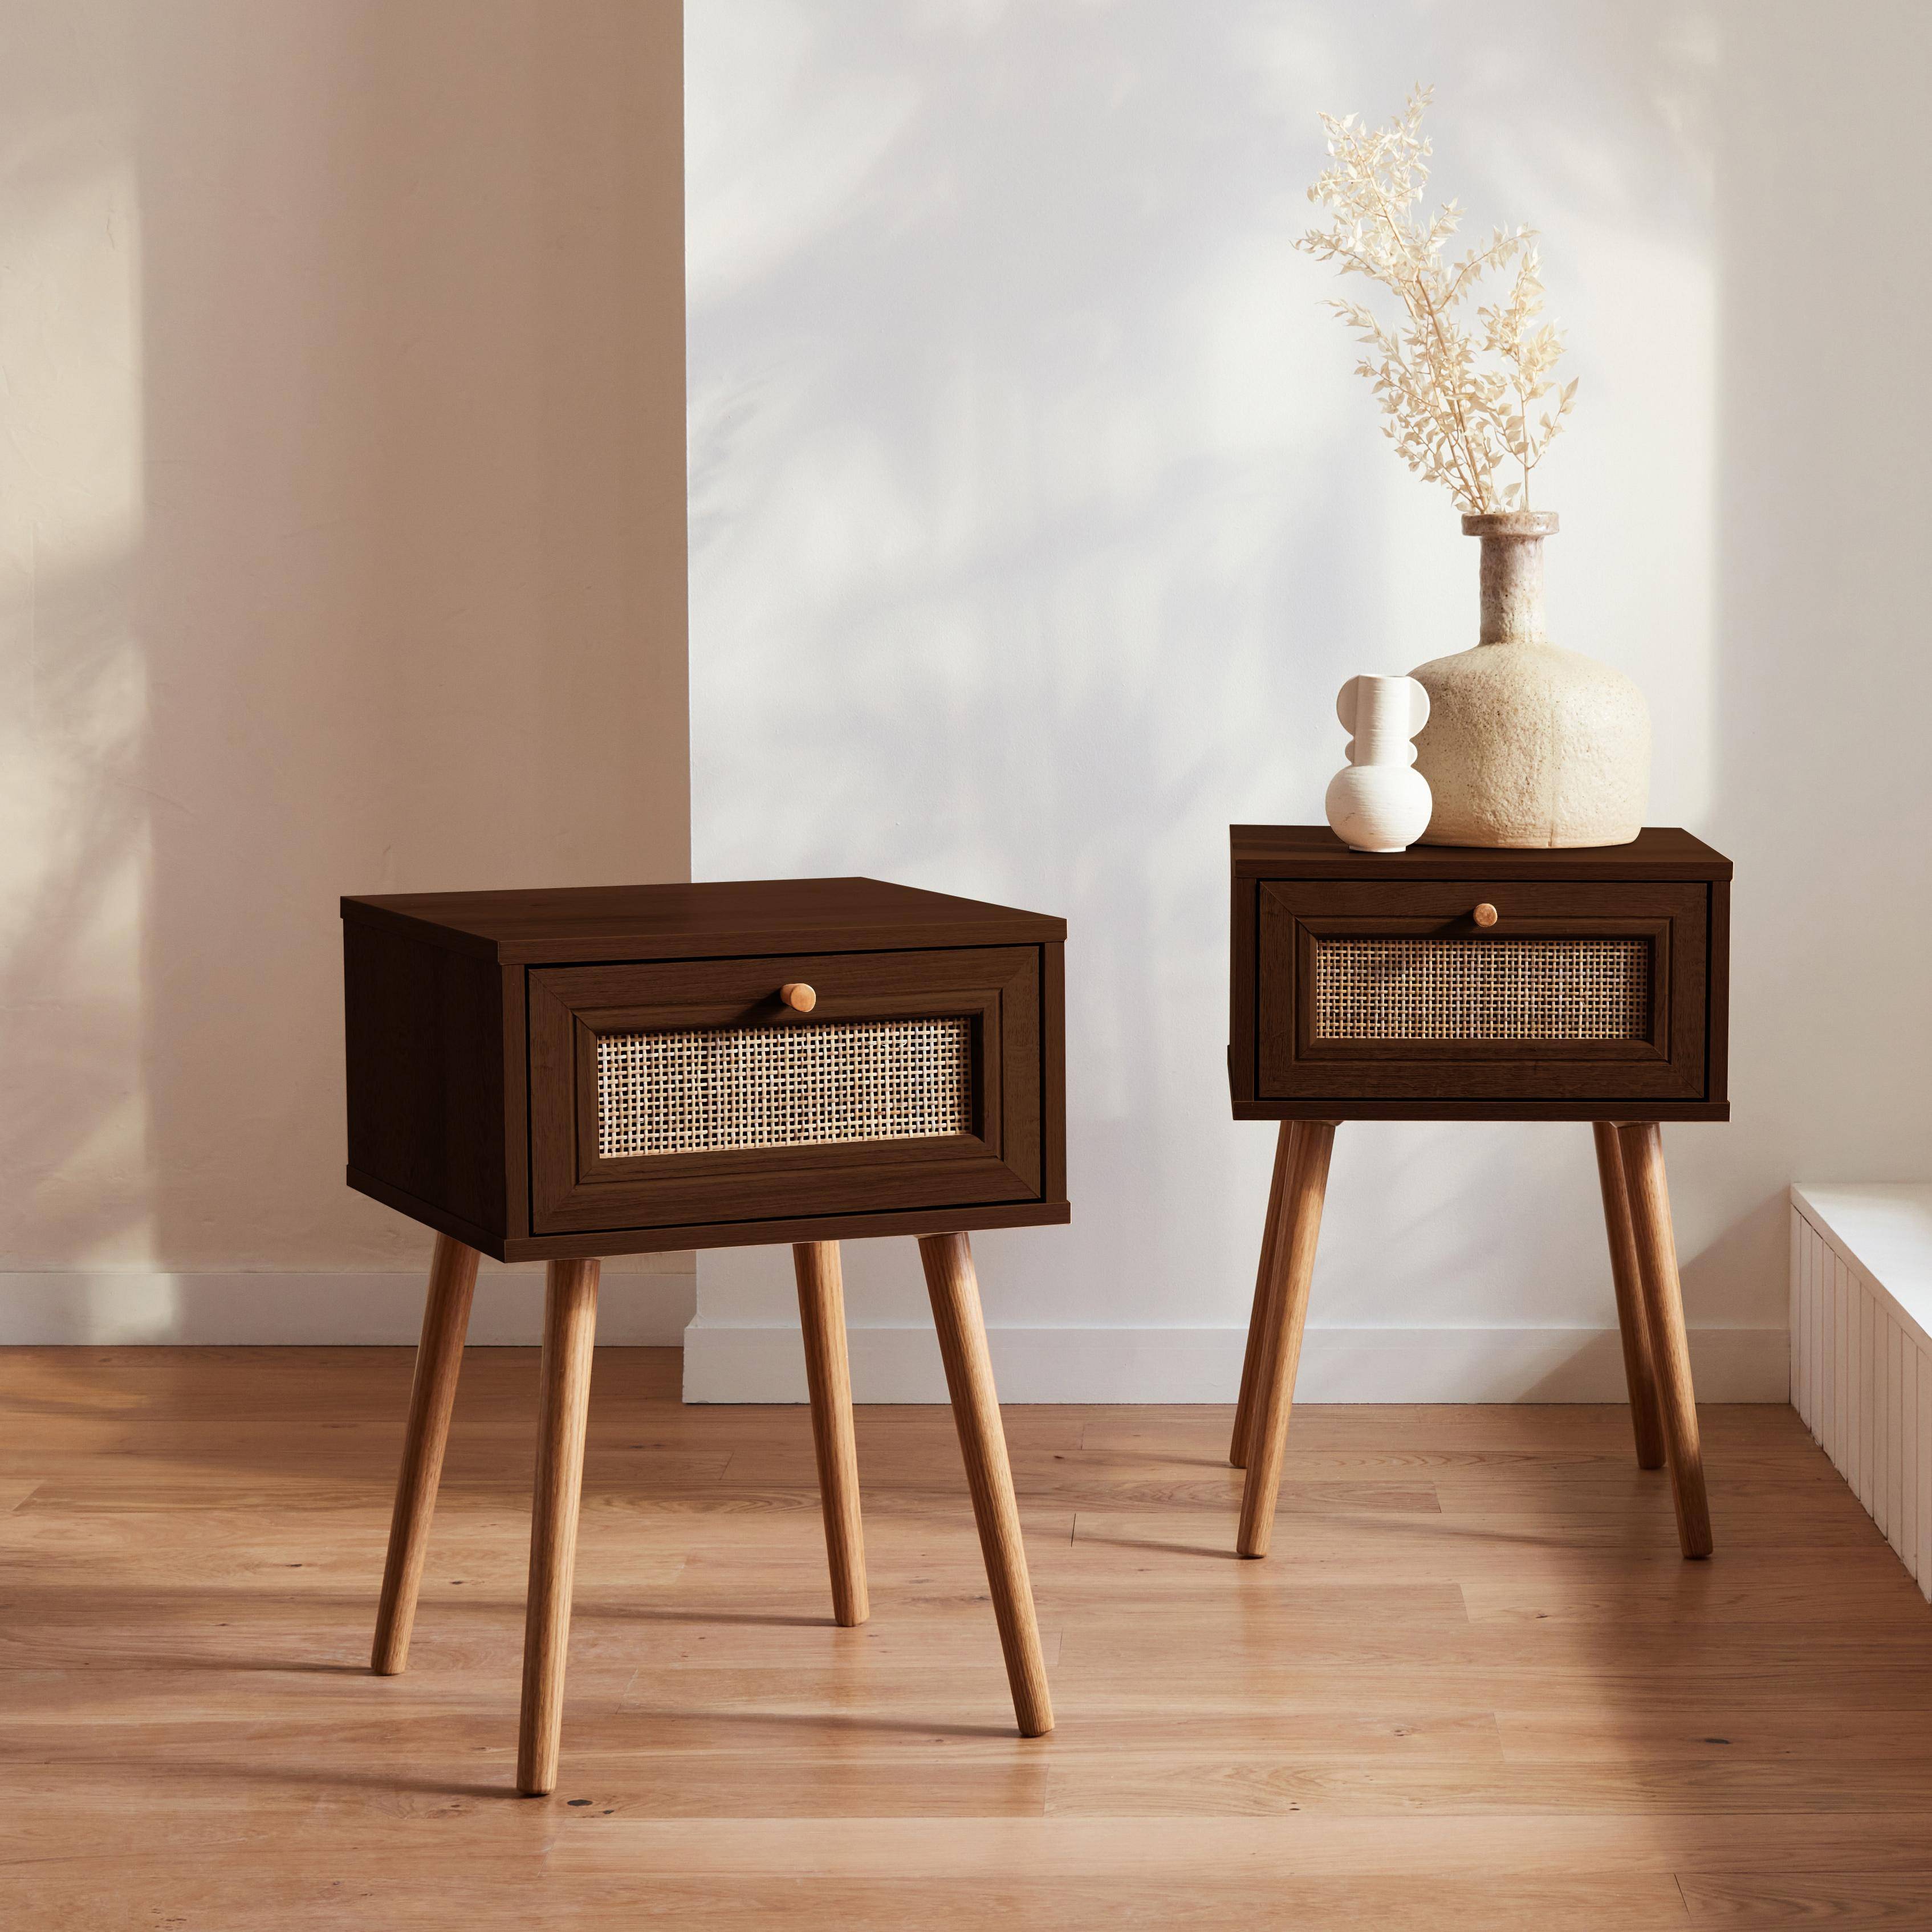 Set of 2 dark wood and cane effect bedside tables with 1 drawer Photo1